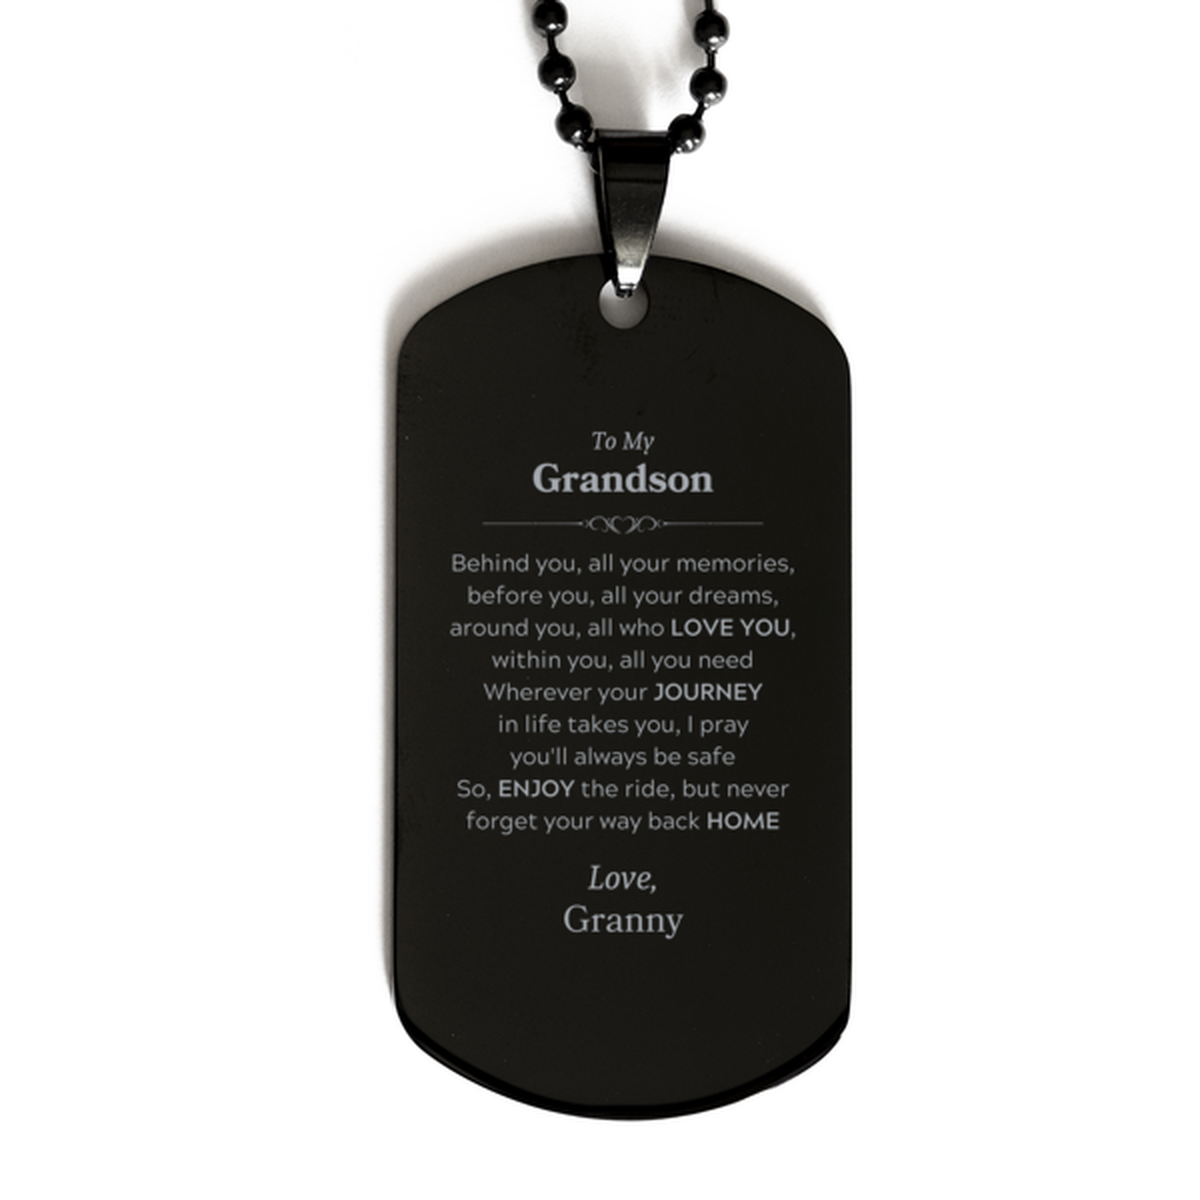 To My Grandson Graduation Gifts from Granny, Grandson Black Dog Tag Christmas Birthday Gifts for Grandson Behind you, all your memories, before you, all your dreams. Love, Granny